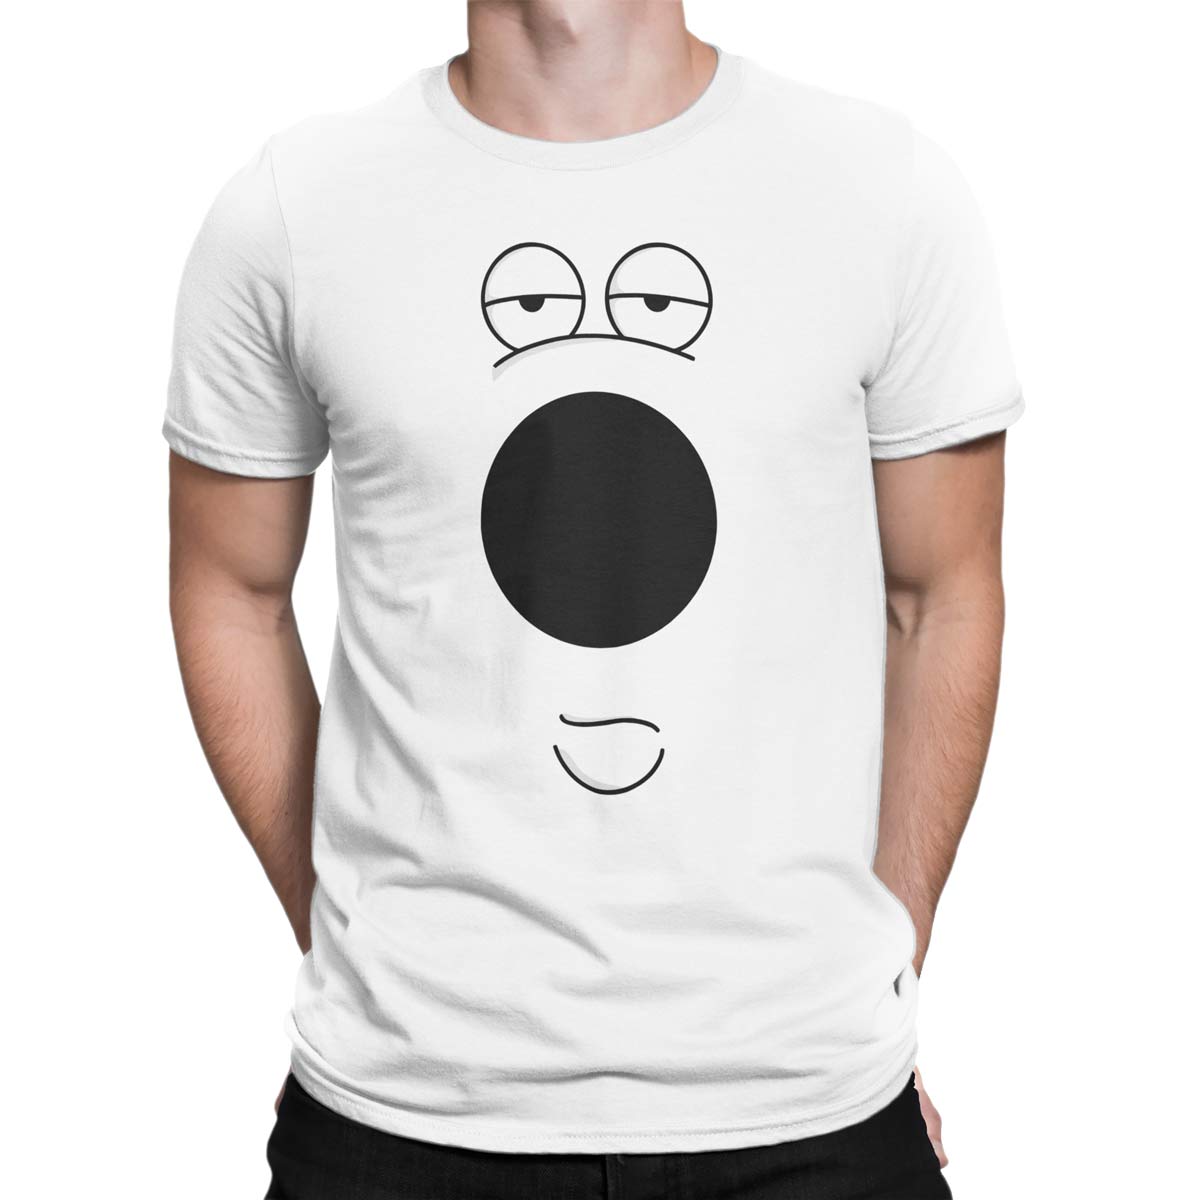 Unisex Family Guy T-Shirts Brian Griffin 3X-Large